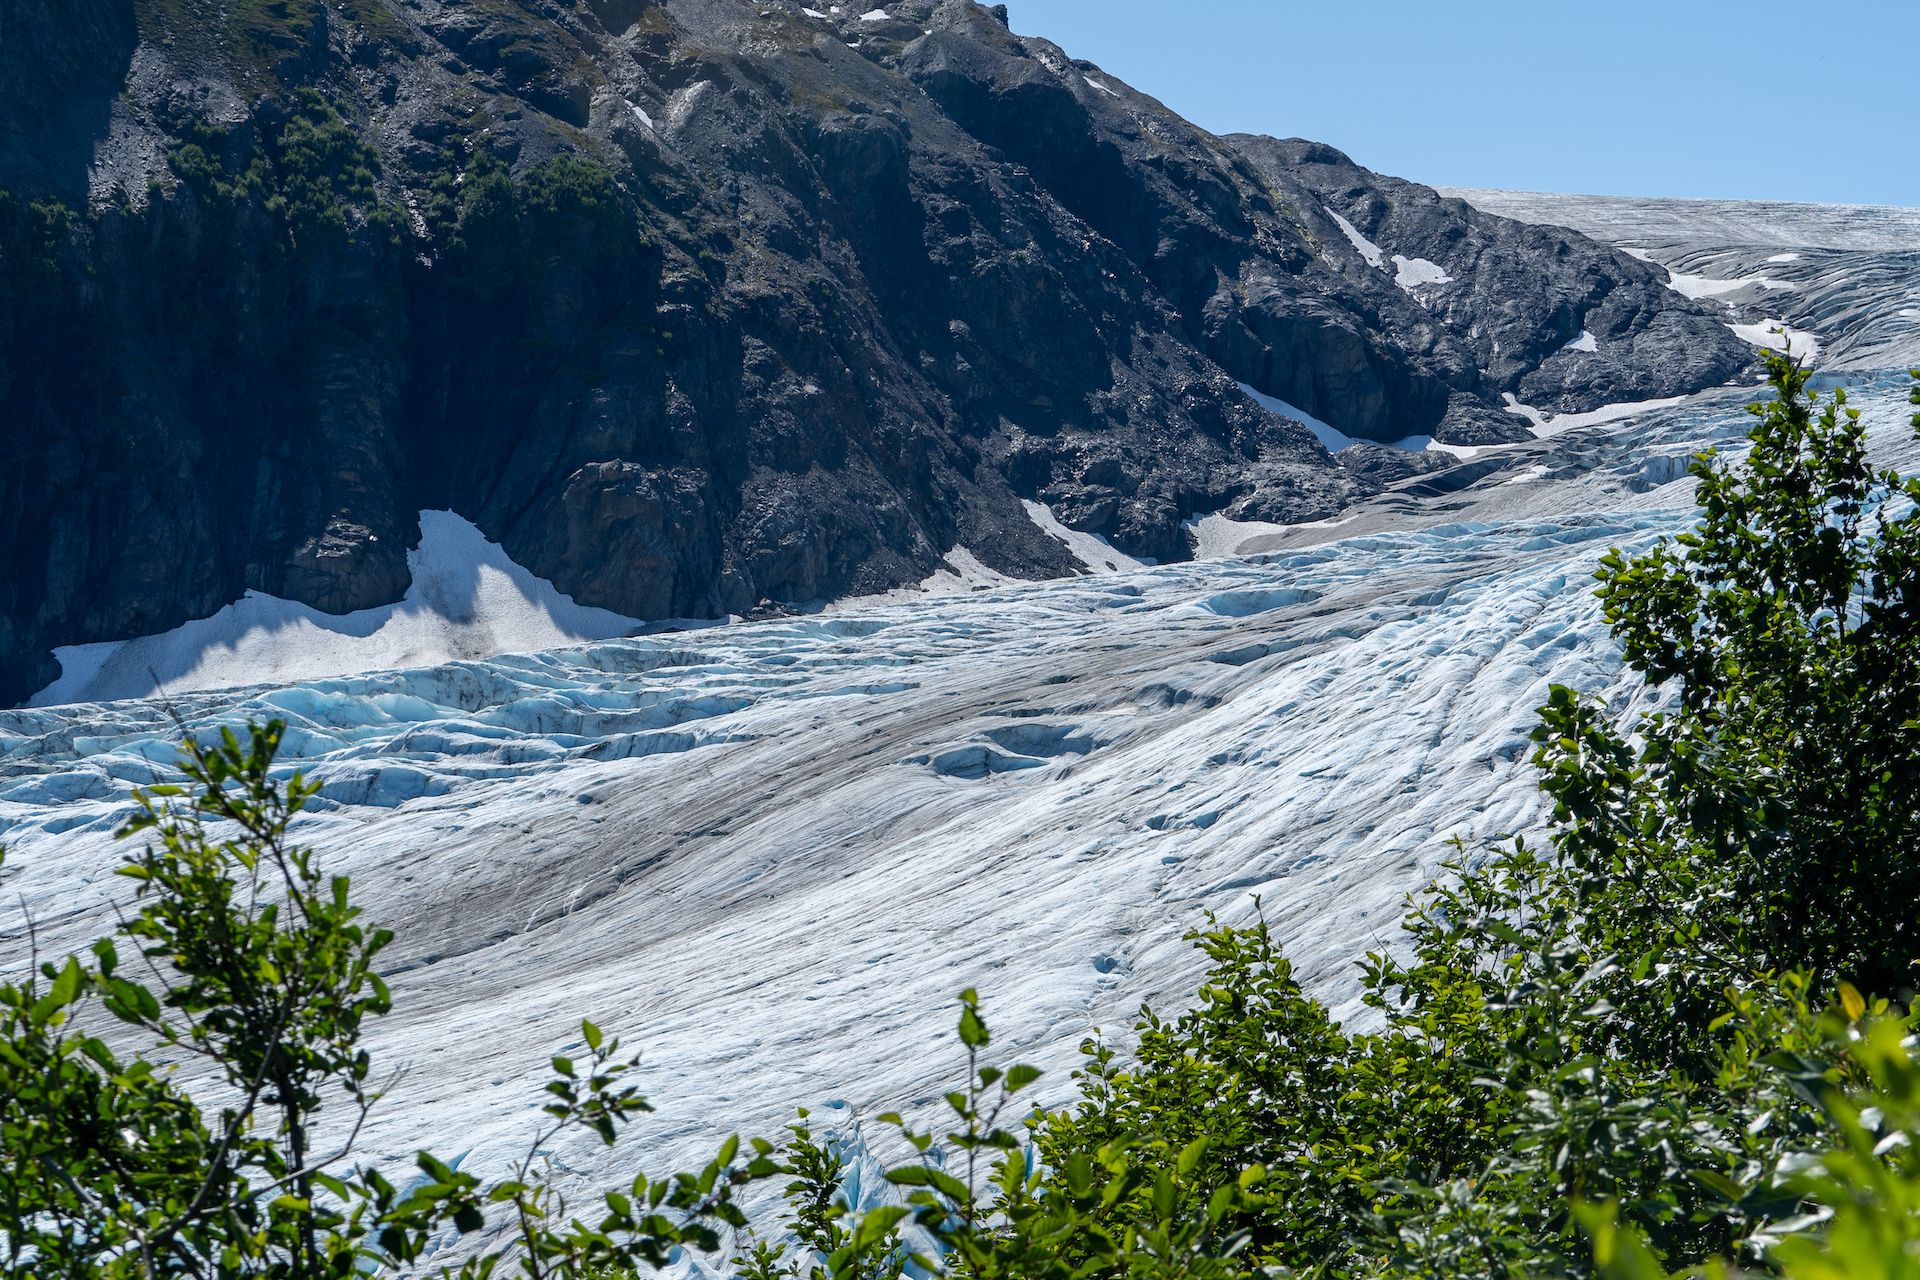 Even though we couldn’t touch the glacier, we could still see a lot of details from a distance.